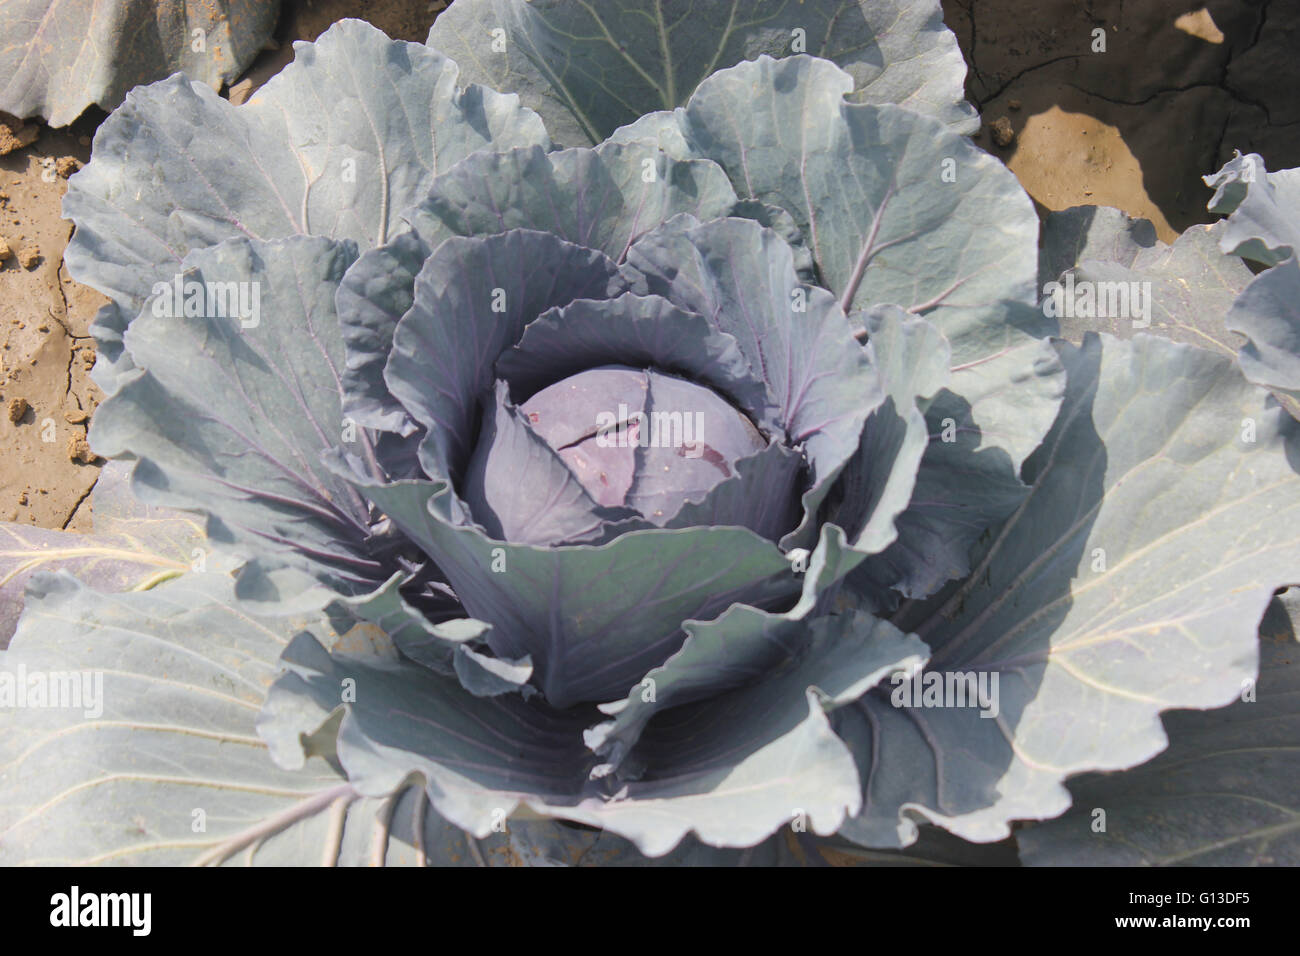 Brassica oleracea var capitata, Red cabbage , cultivar of cabbage with compact large head of red leaves Stock Photo